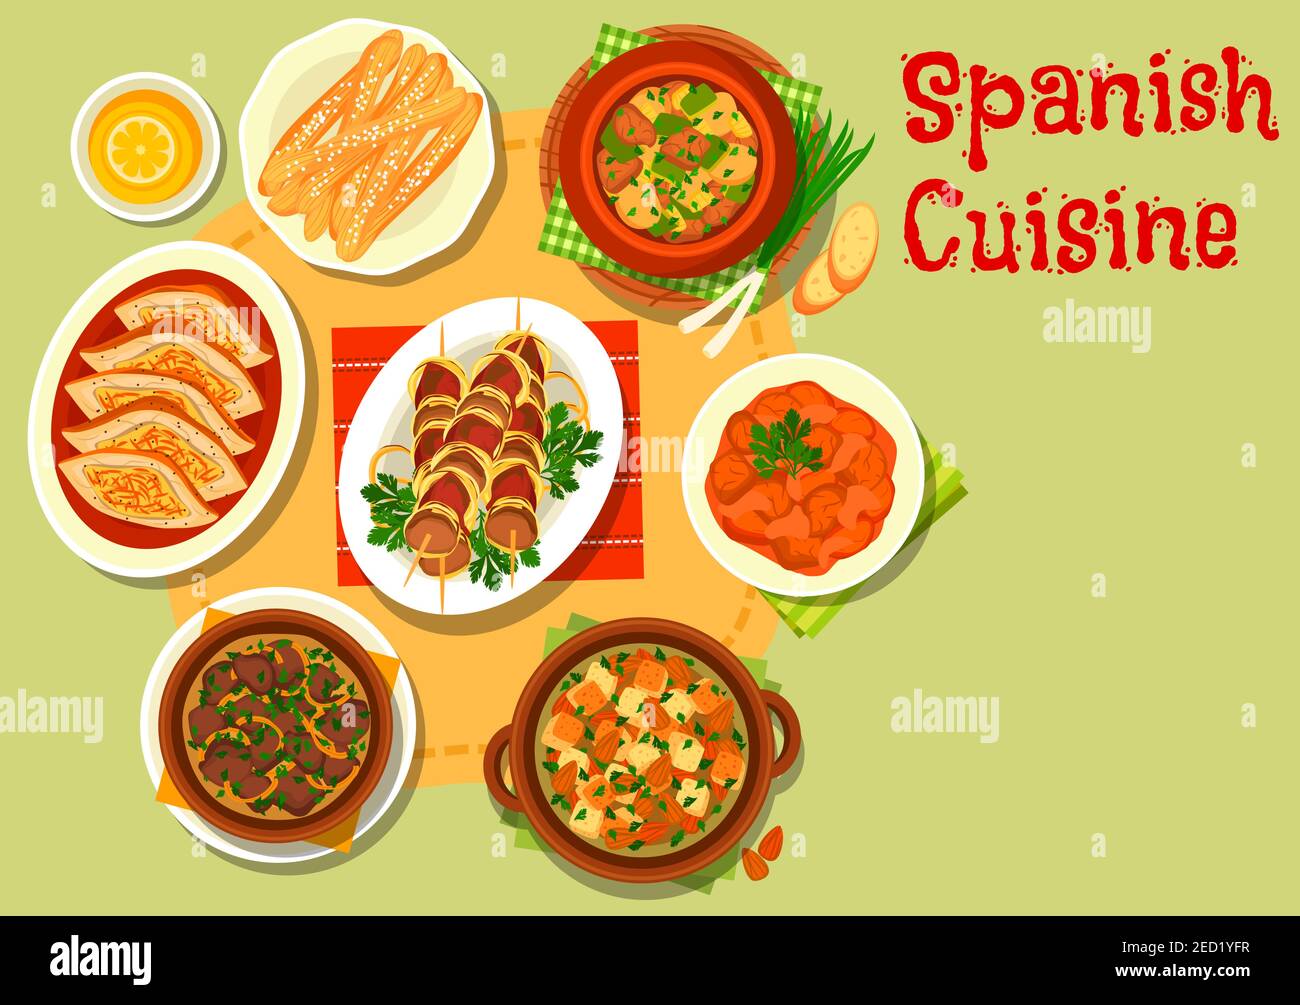 Spanish cuisine pork tomato stew icon, served with almond soup, liver in garlic onion sauce, grilled lamb kidney on stick, stuffed pork belly, lamb ve Stock Vector